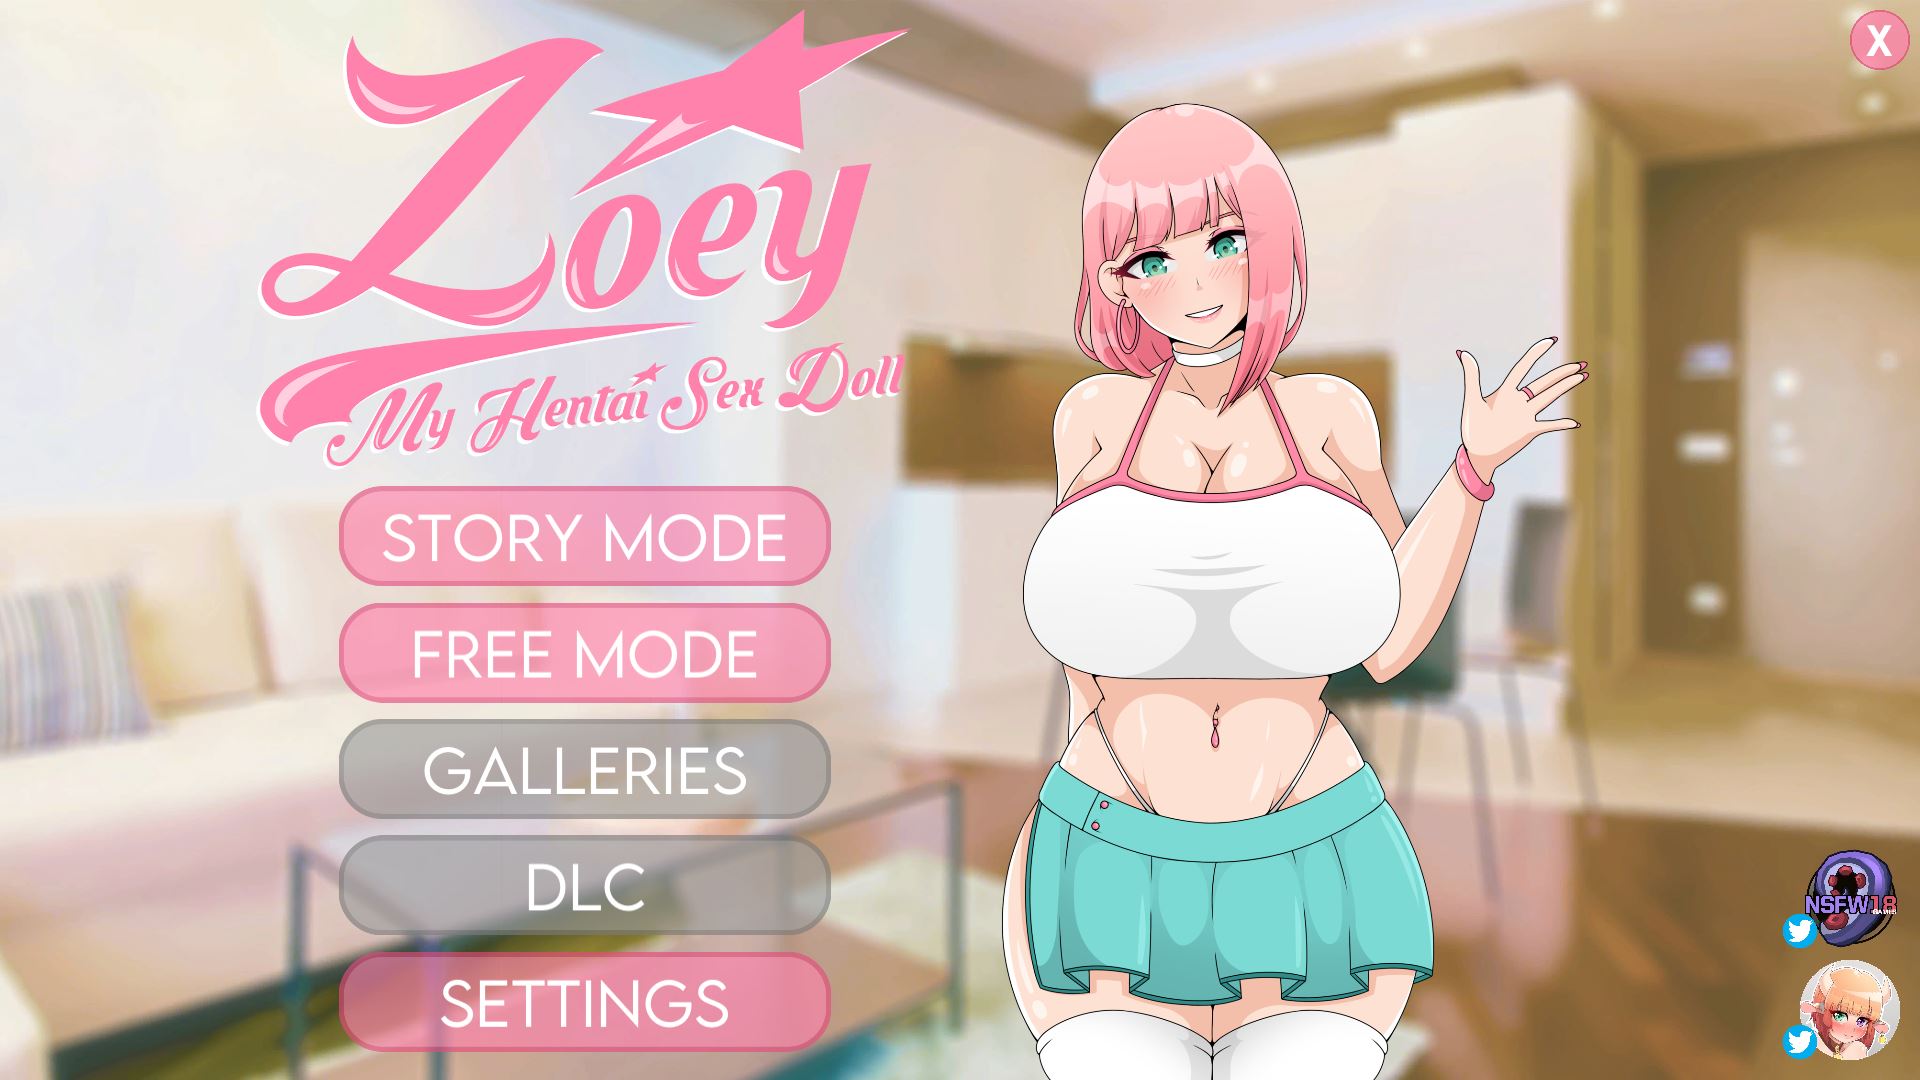 Unity Zoey My Hentai Sex Doll pic